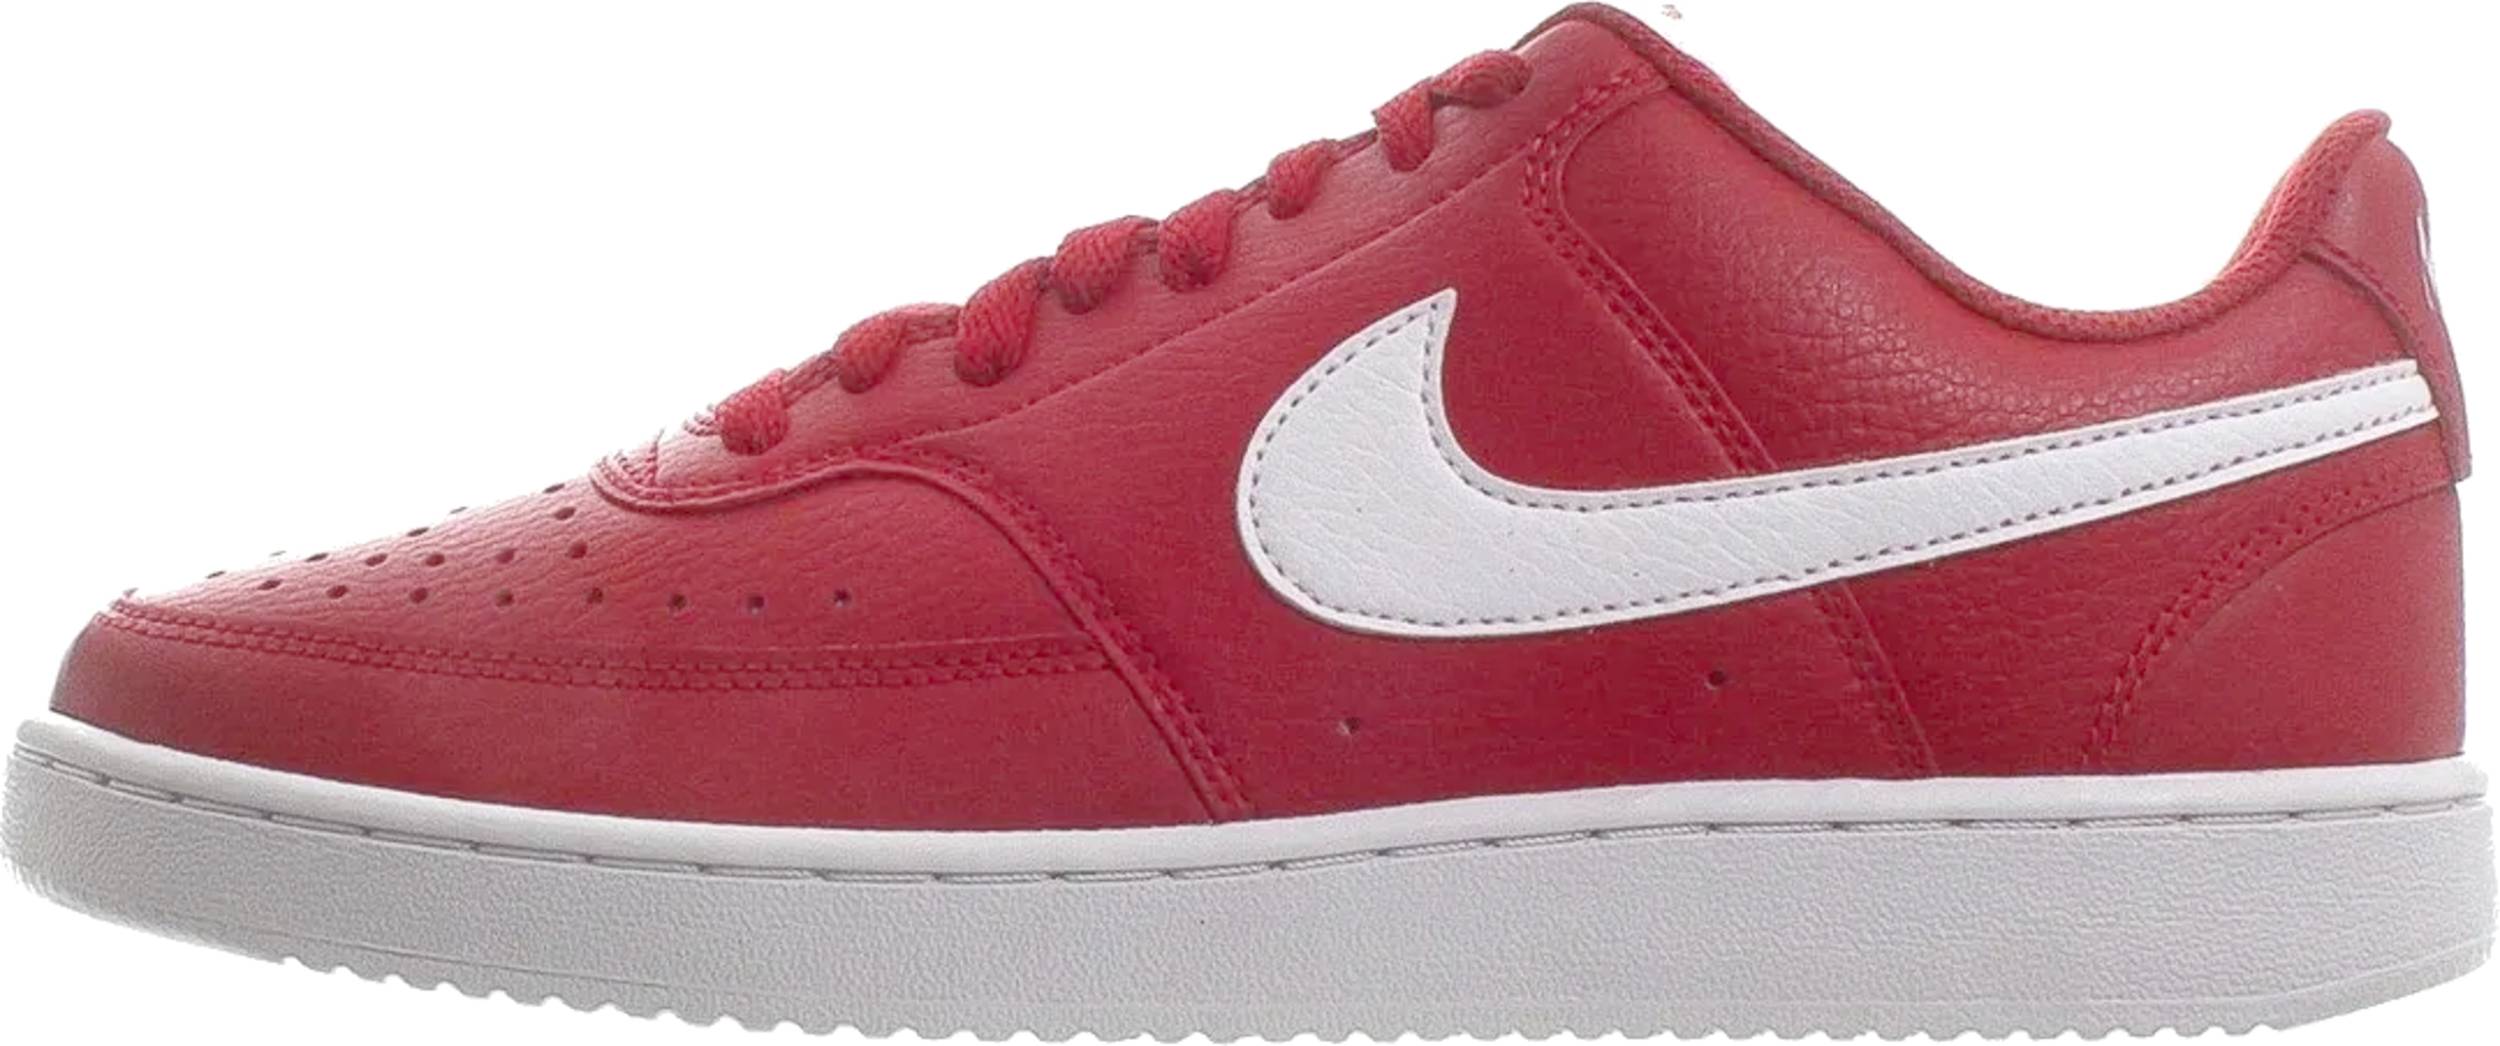 red and white nike shoes